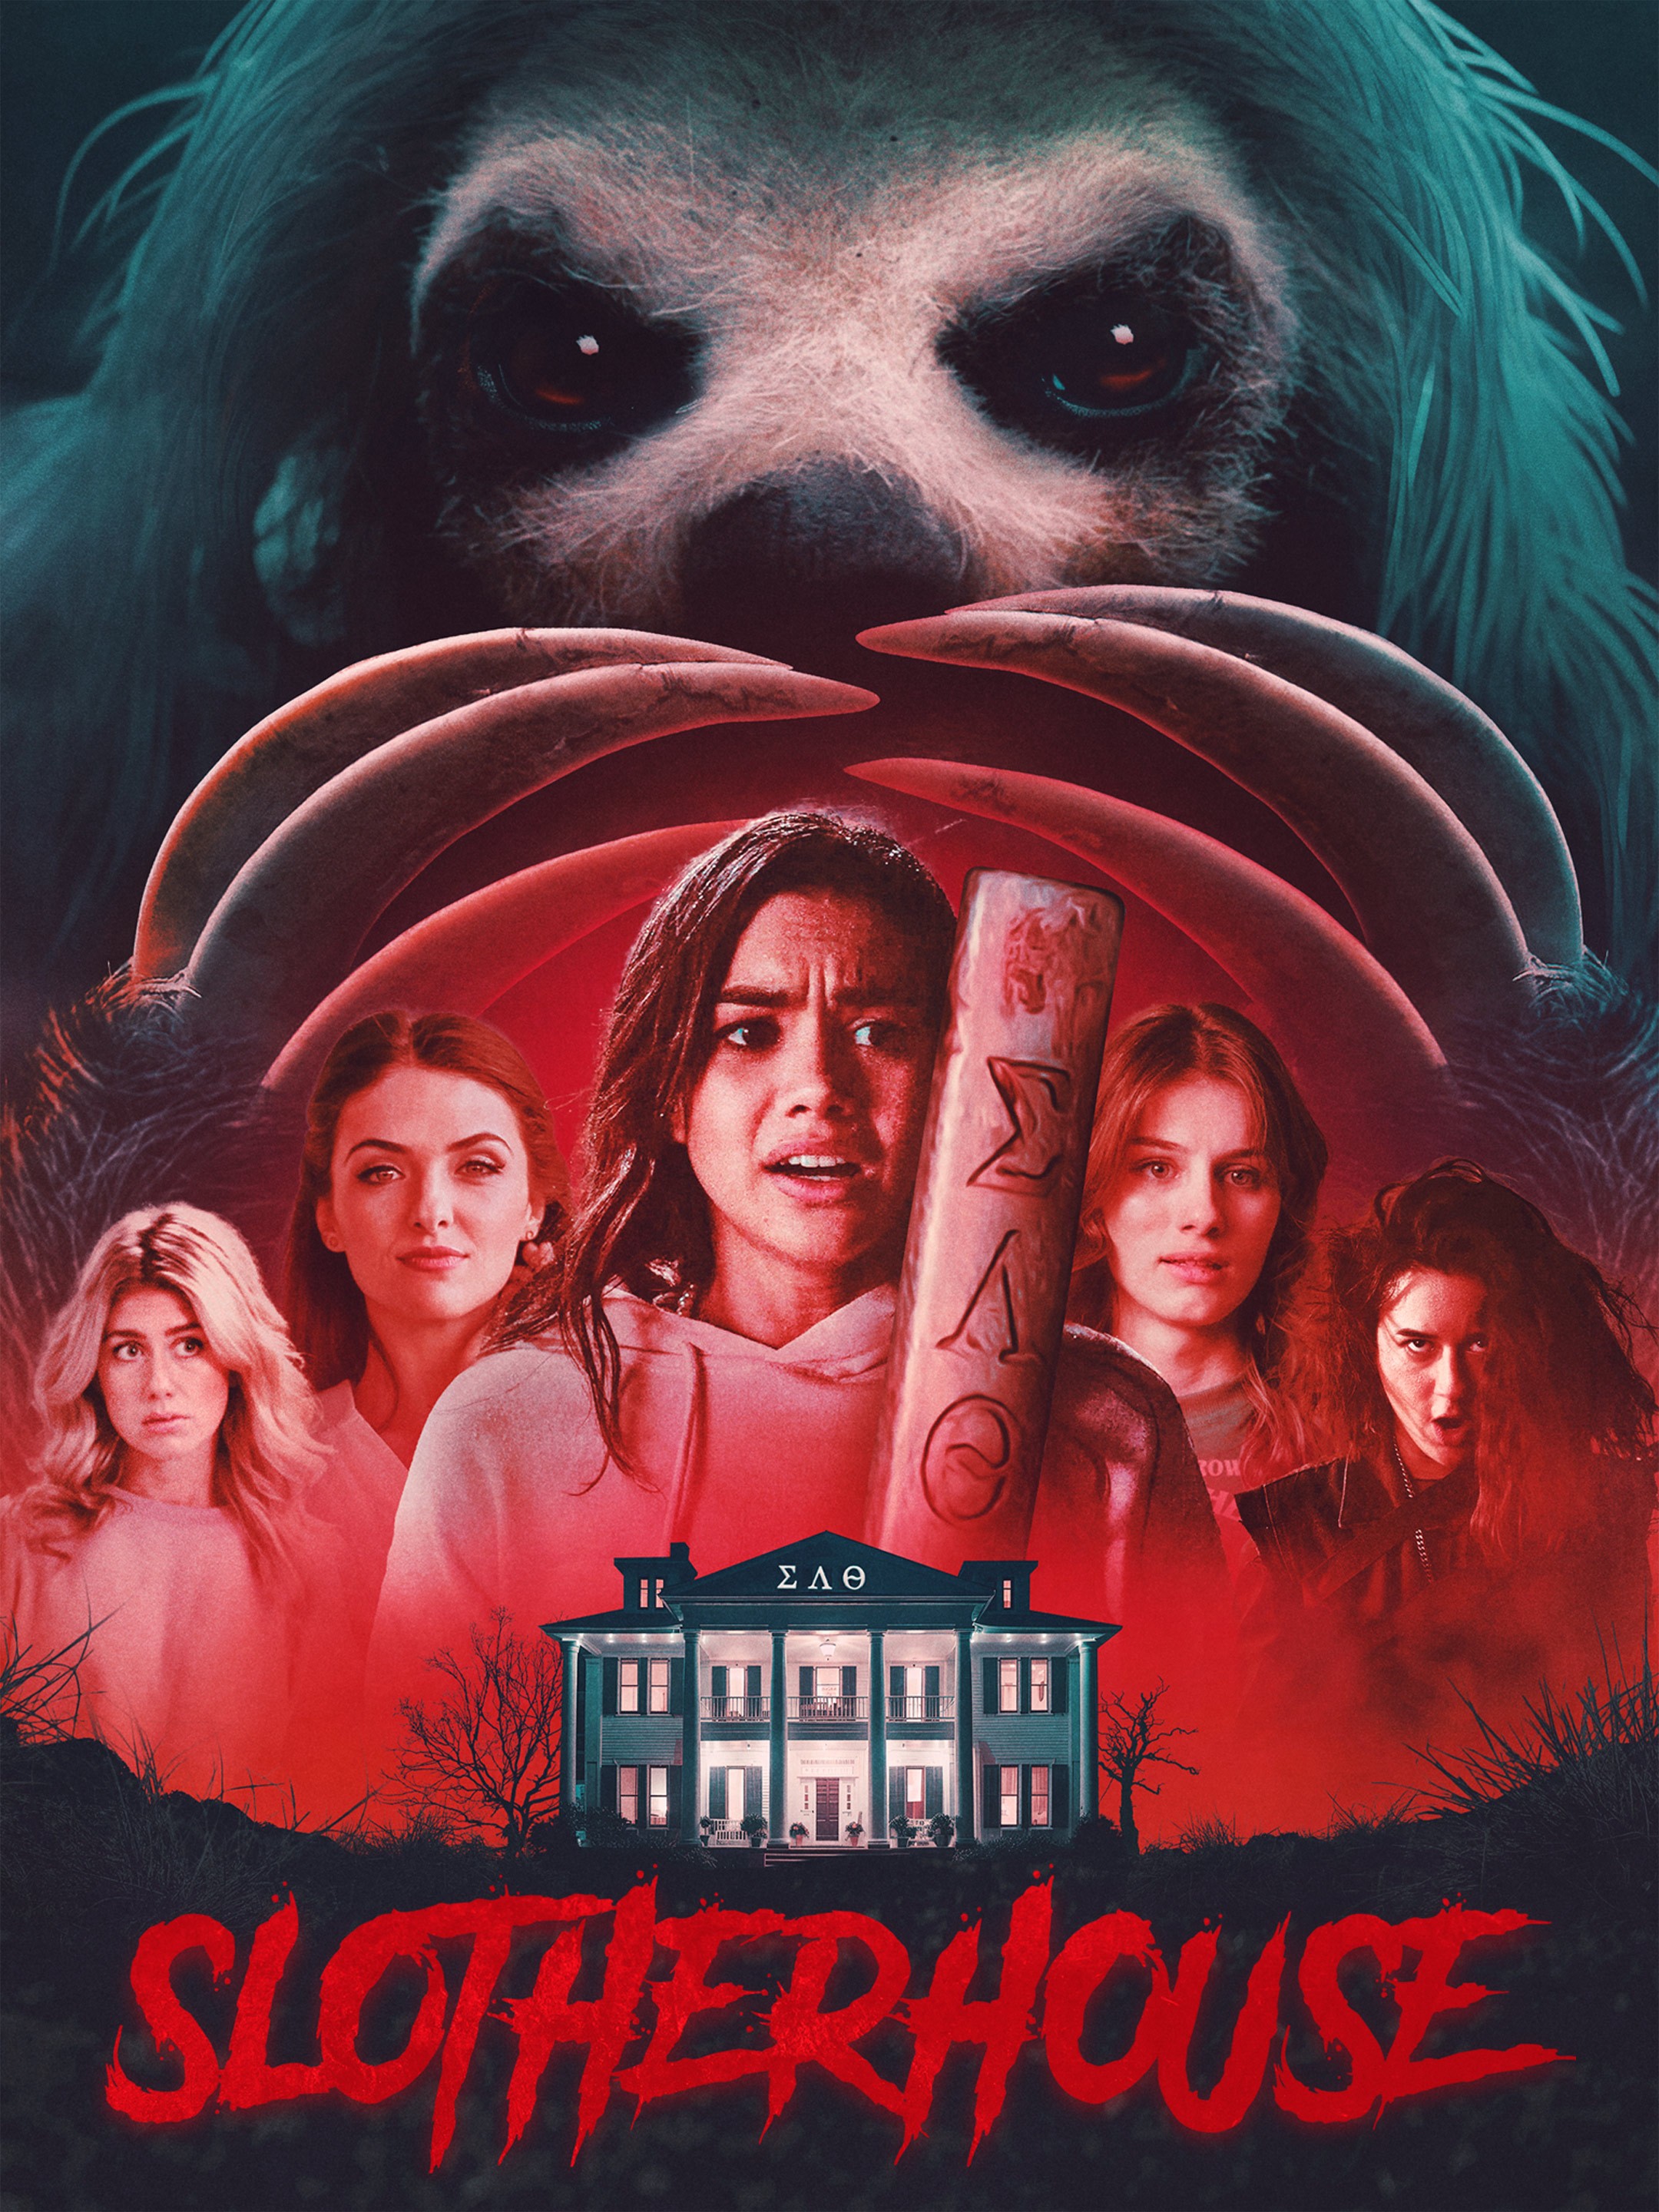 Playing With Fire - Scared Sloth Film Reviews